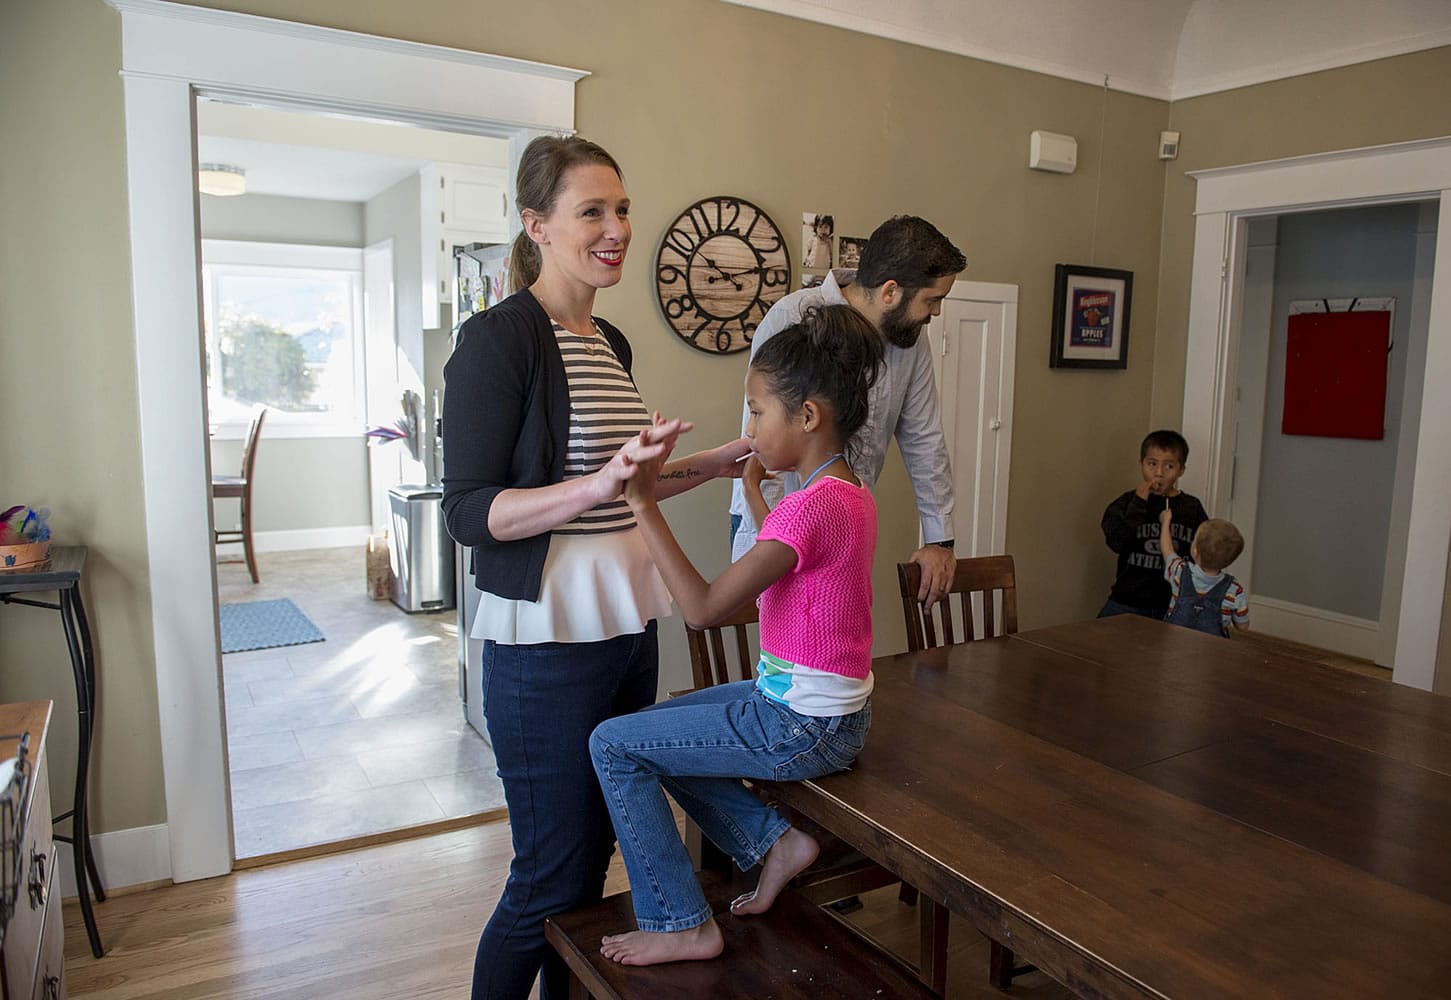 Sarah Desjarlais, left, hangs out with her daughter, Avi, 6, as her husband, Zachery, keeps an eye on Anthony, 6, and Atticus, 3, at their home in Vancouver.